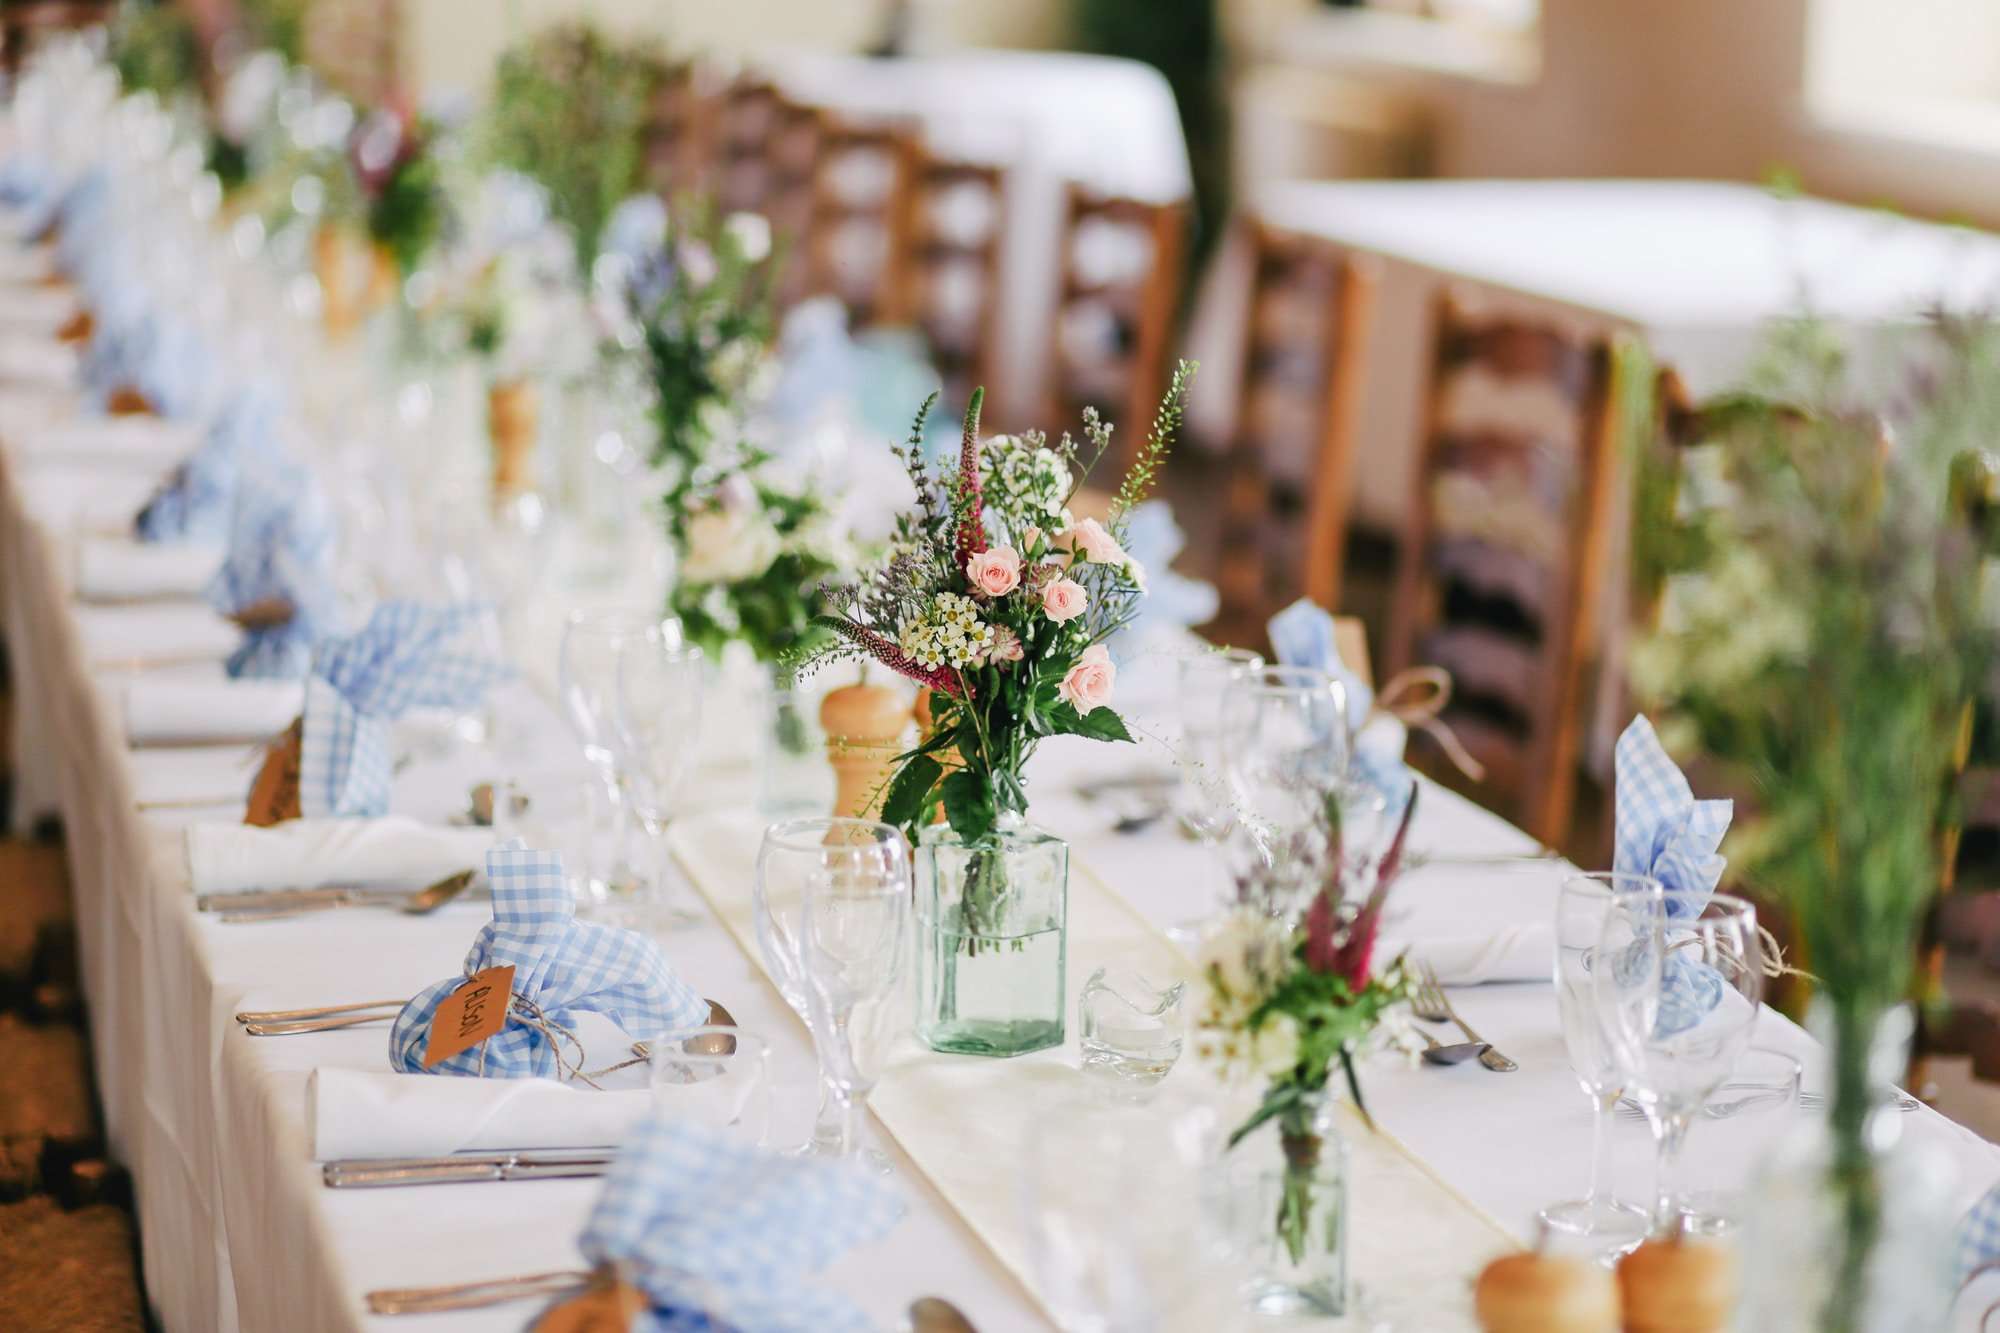 What is included in wedding catering services?